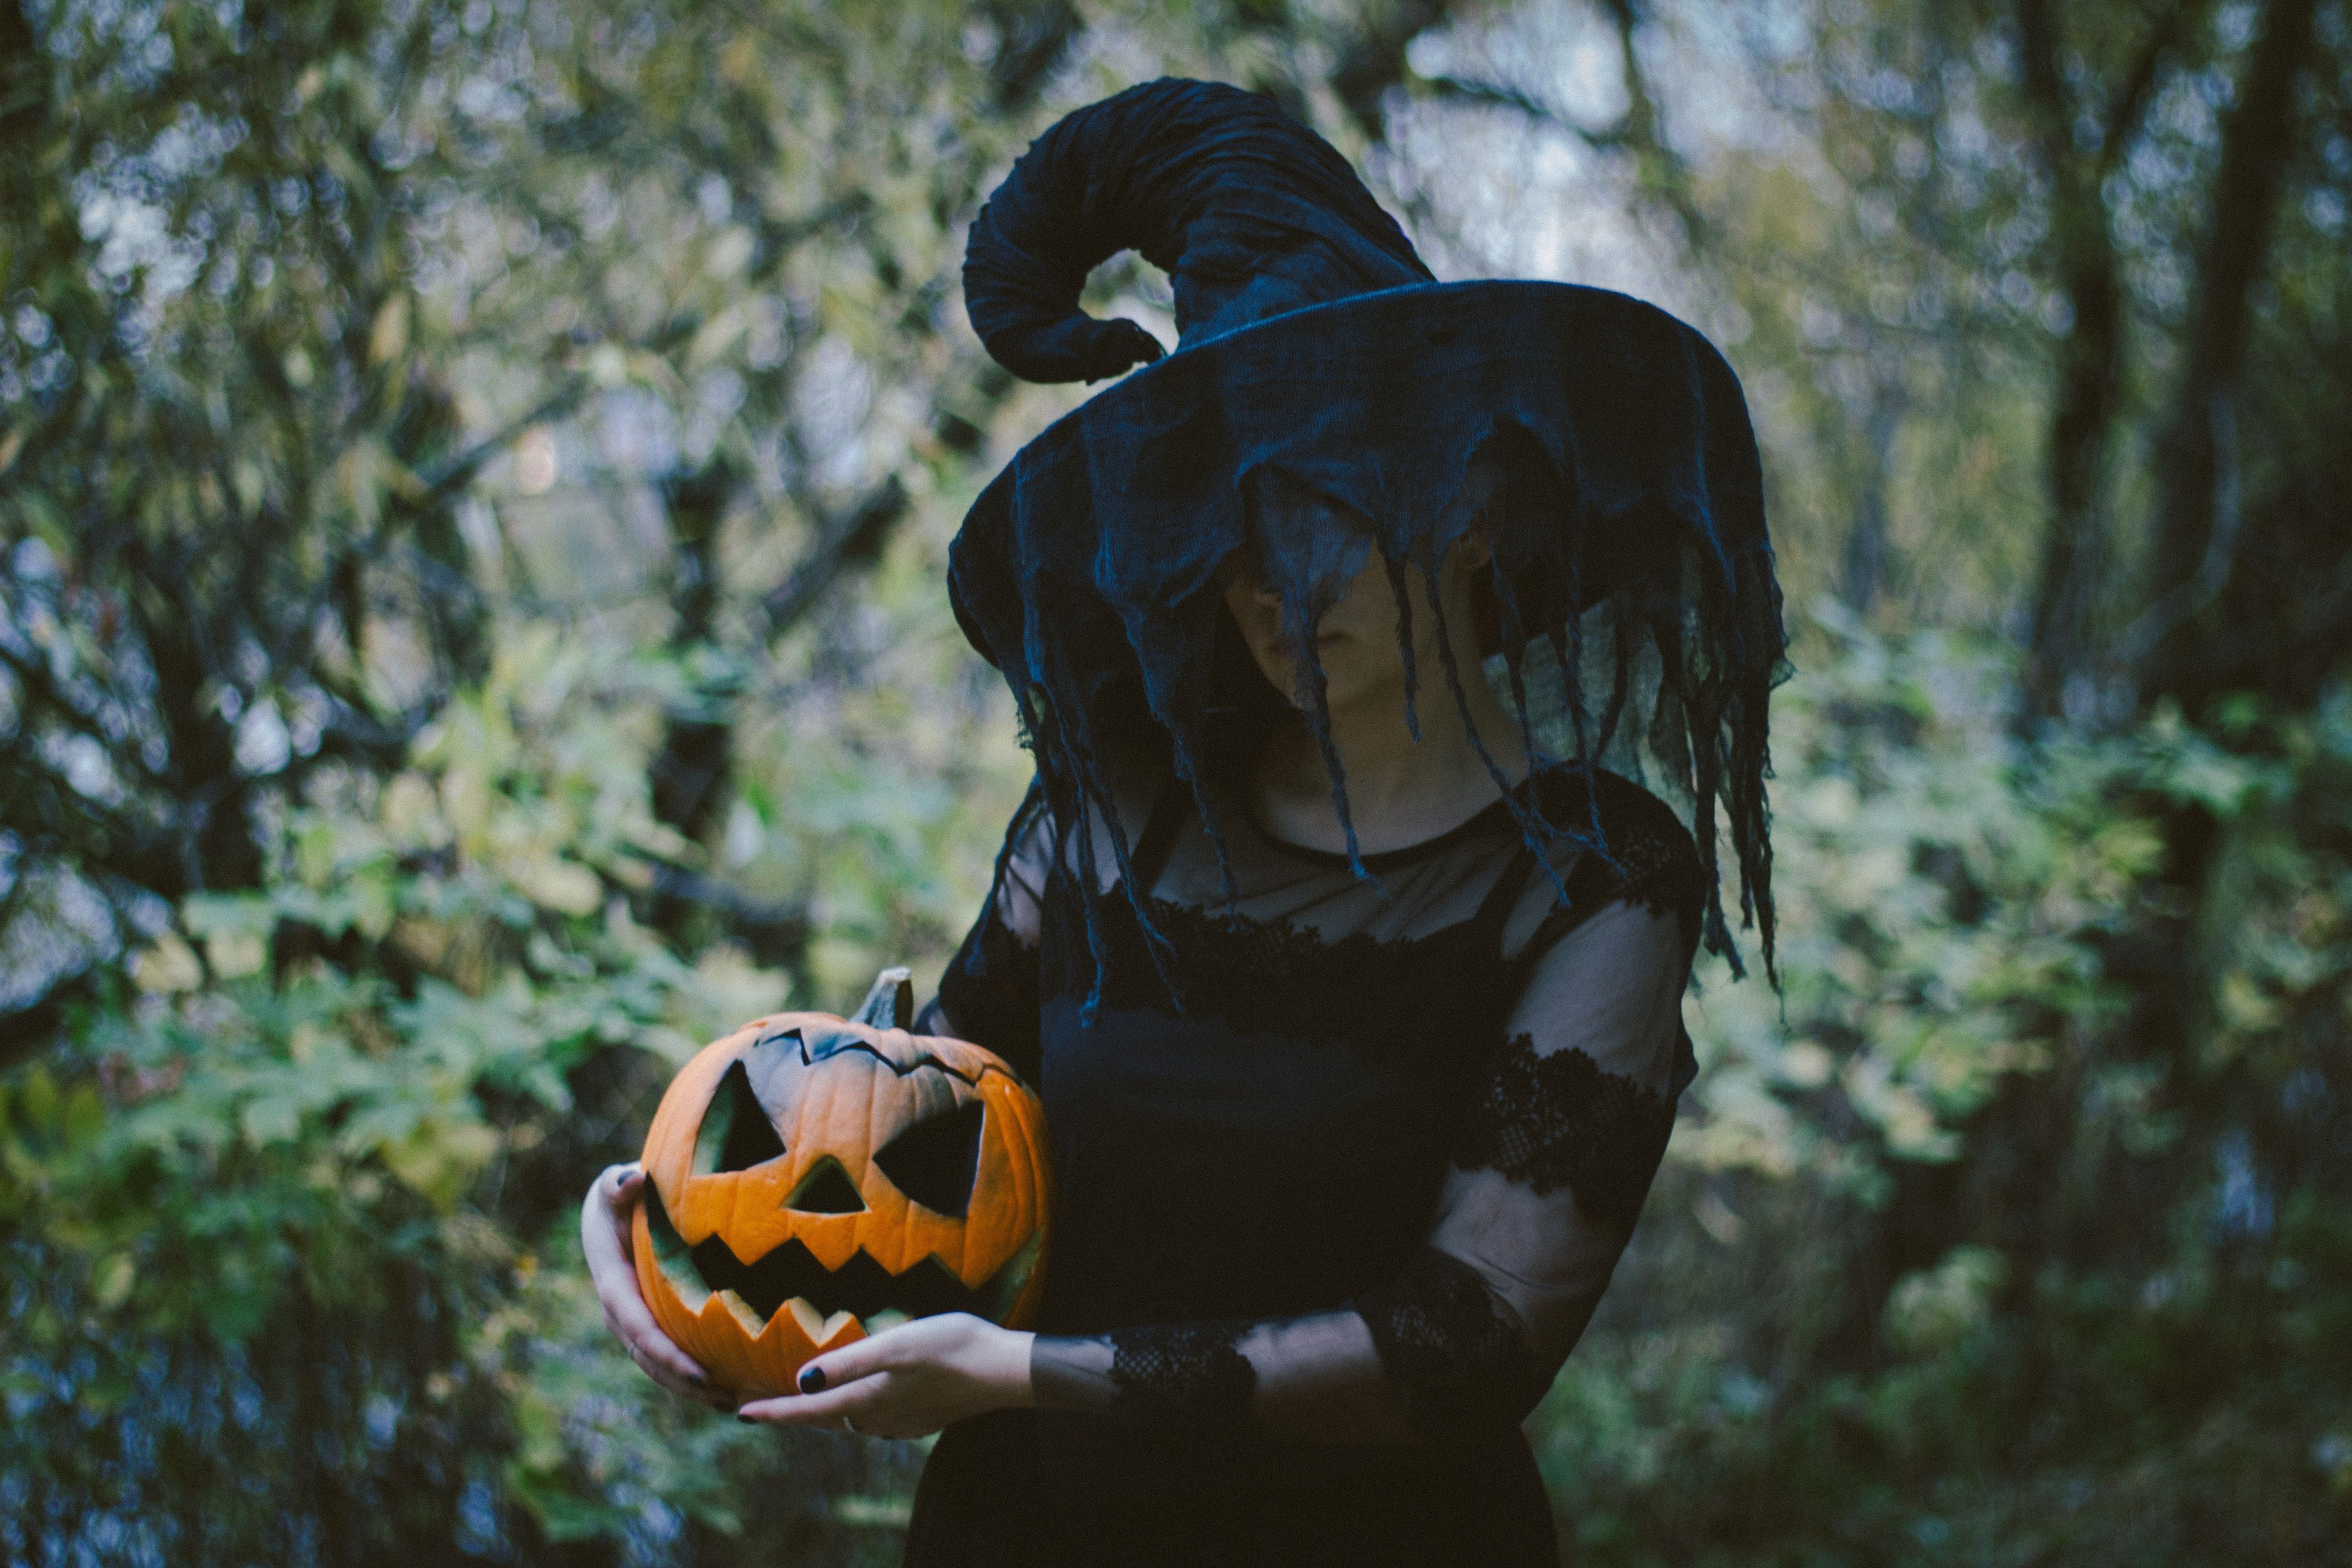 A woman dressed in a witch costume while holding a carved pumpkin for Halloween